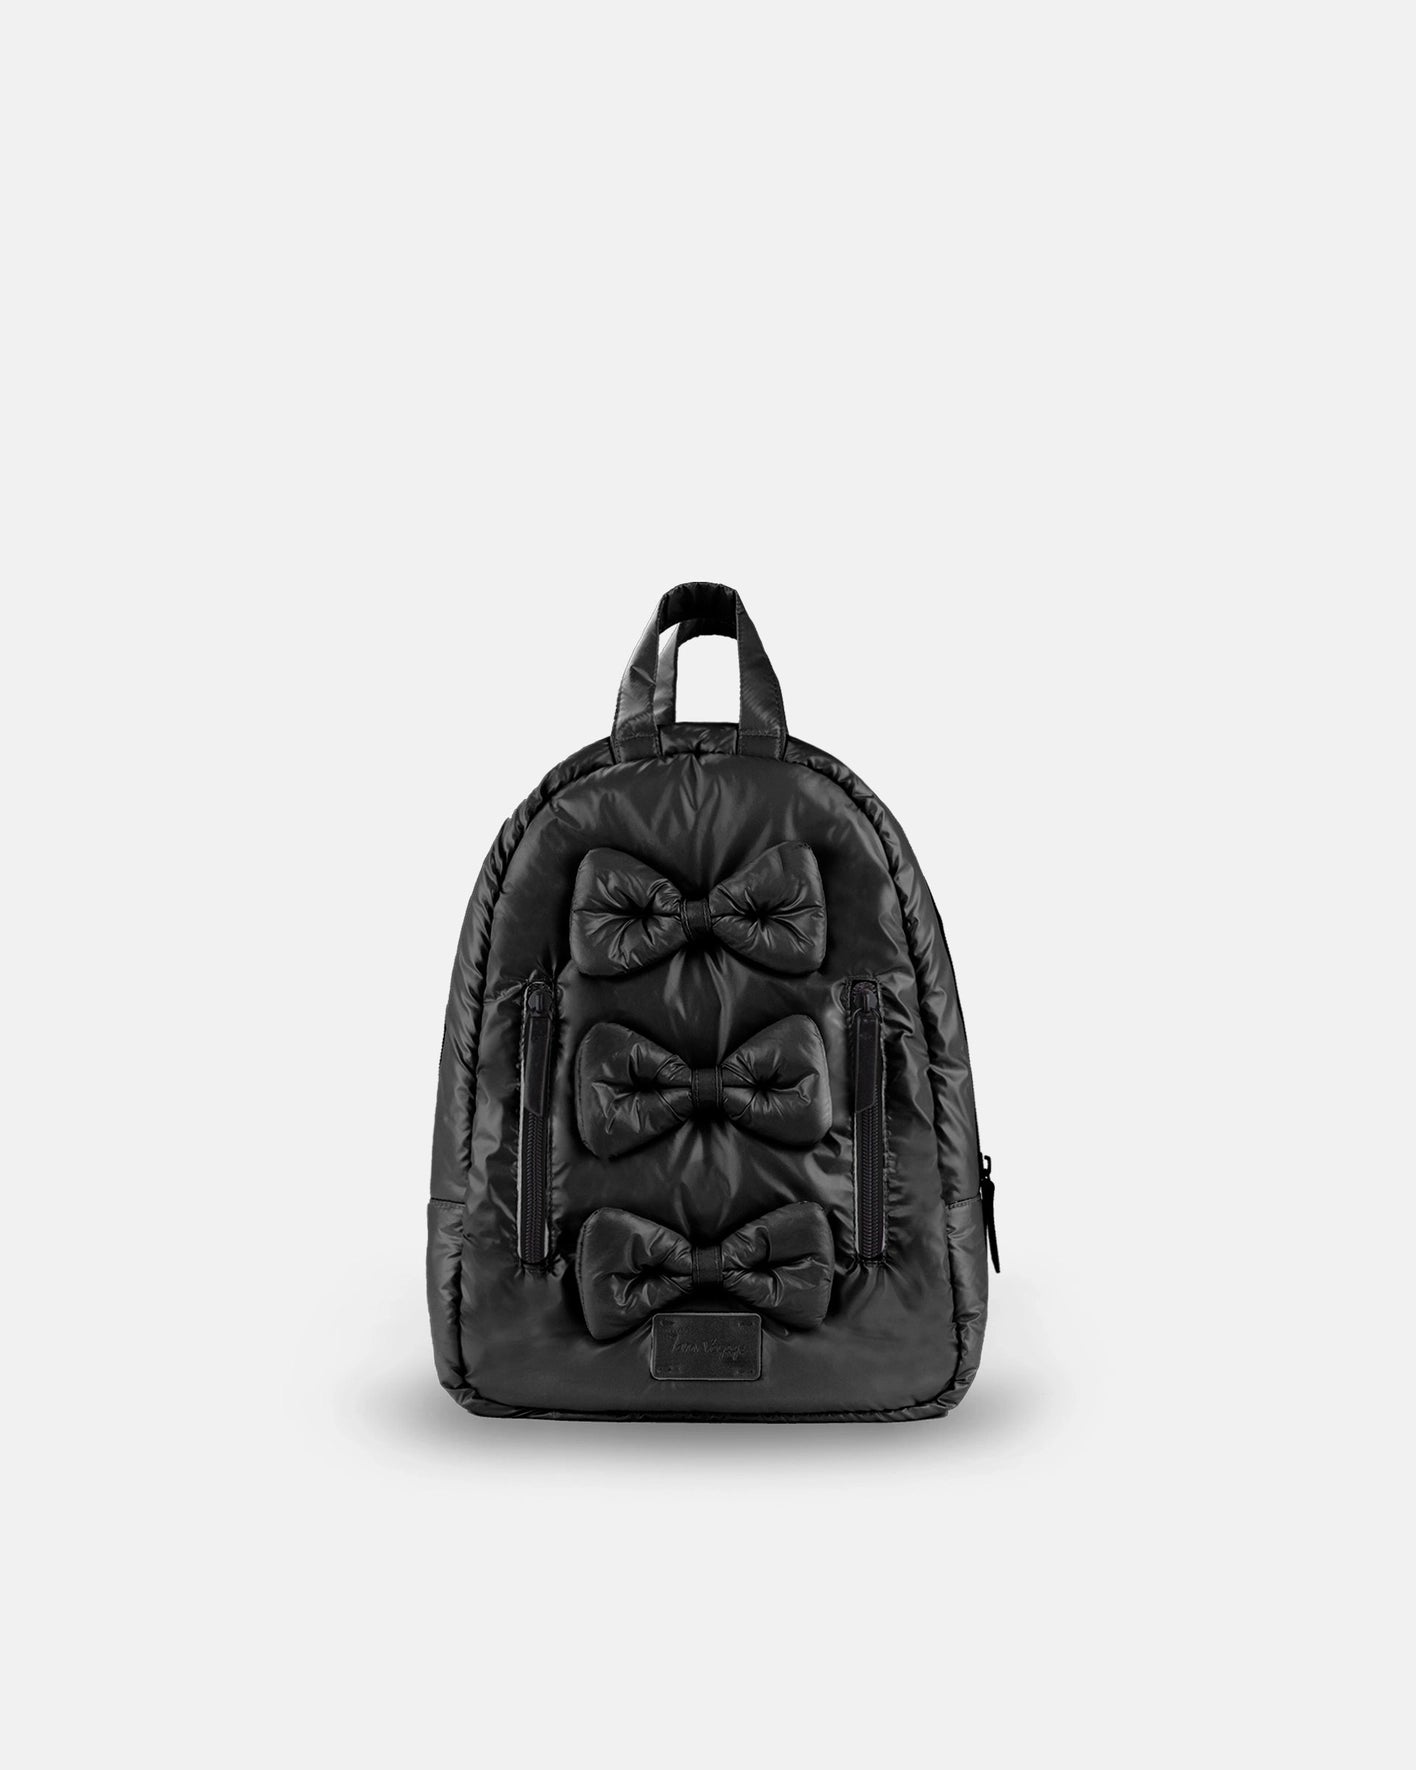 Bows Backpack | The Max Collection